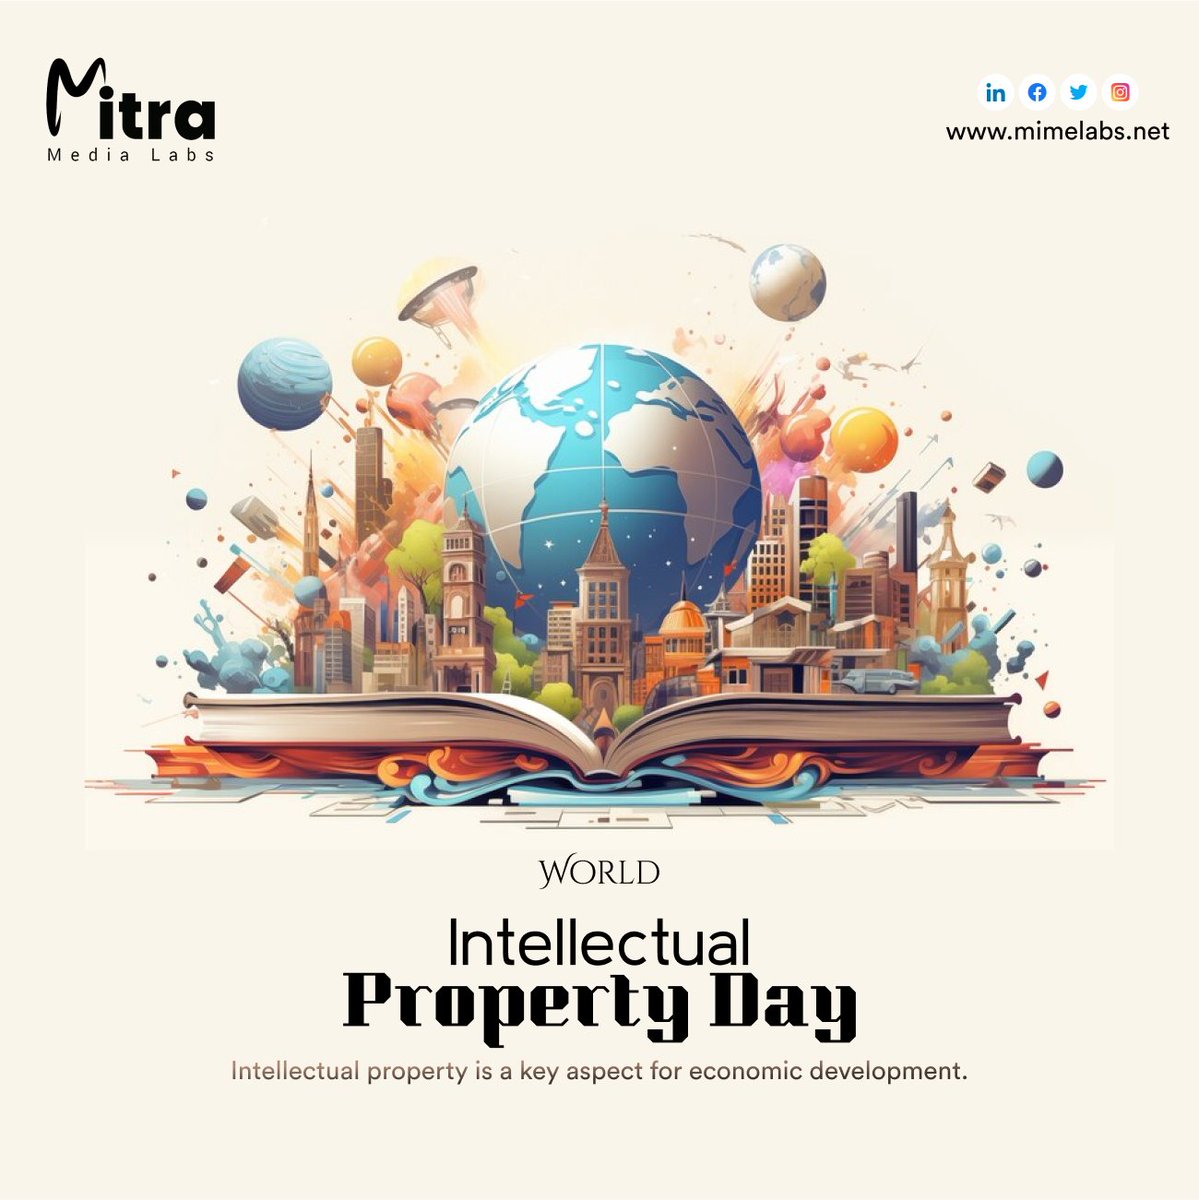 Happy World Intellectual Property Day! May this day inspire you to innovate, and protect your unique ideas!

#WorldIntellectualPropertyDay2024 #Innovation #Creativity #IntellectualPropertyRights #MitraMediaLabs #2024